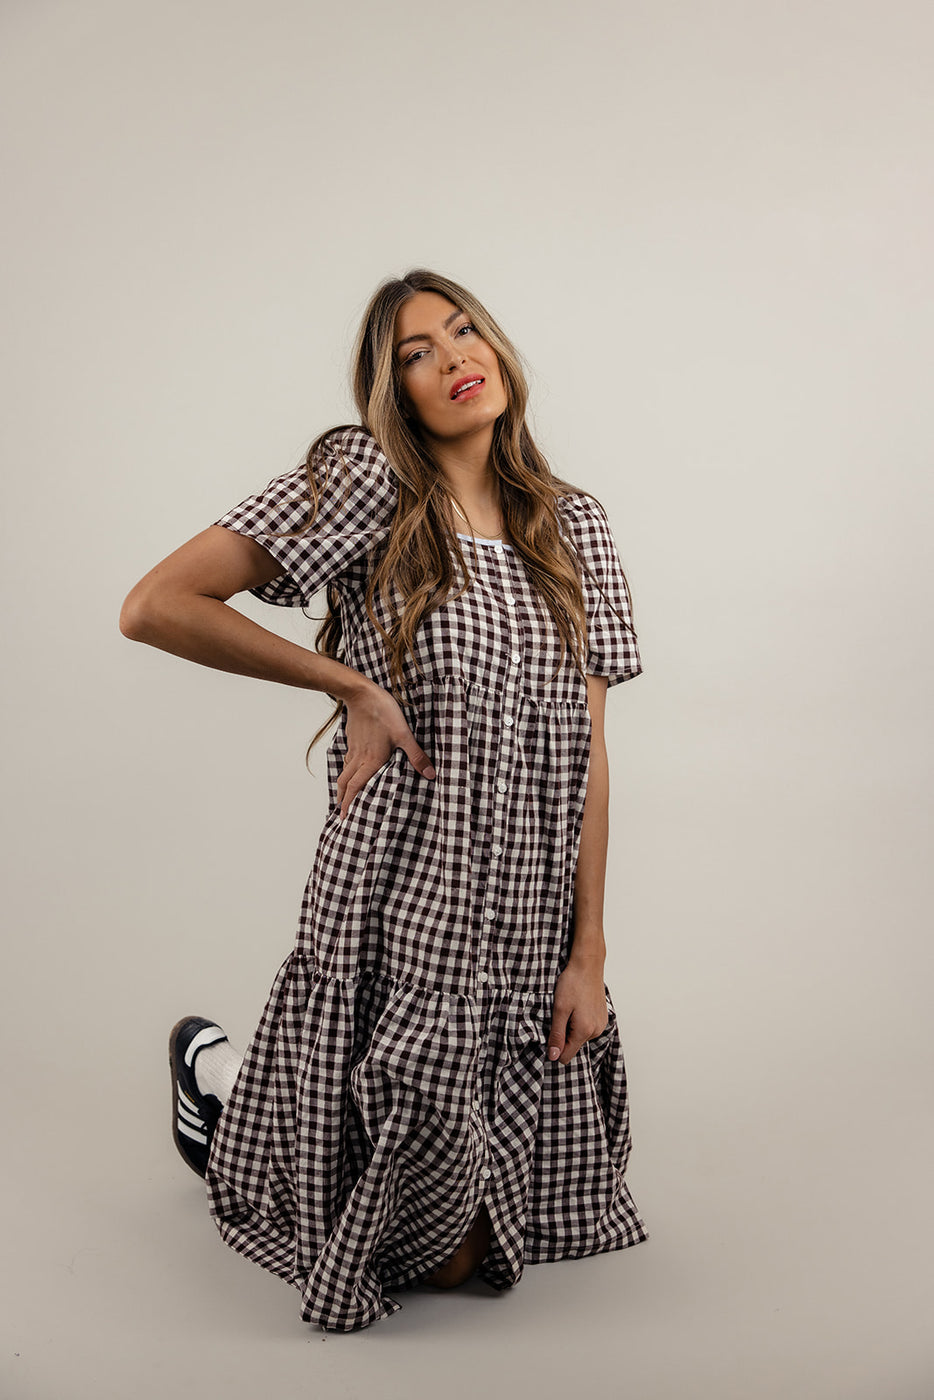 a woman in a checkered dress